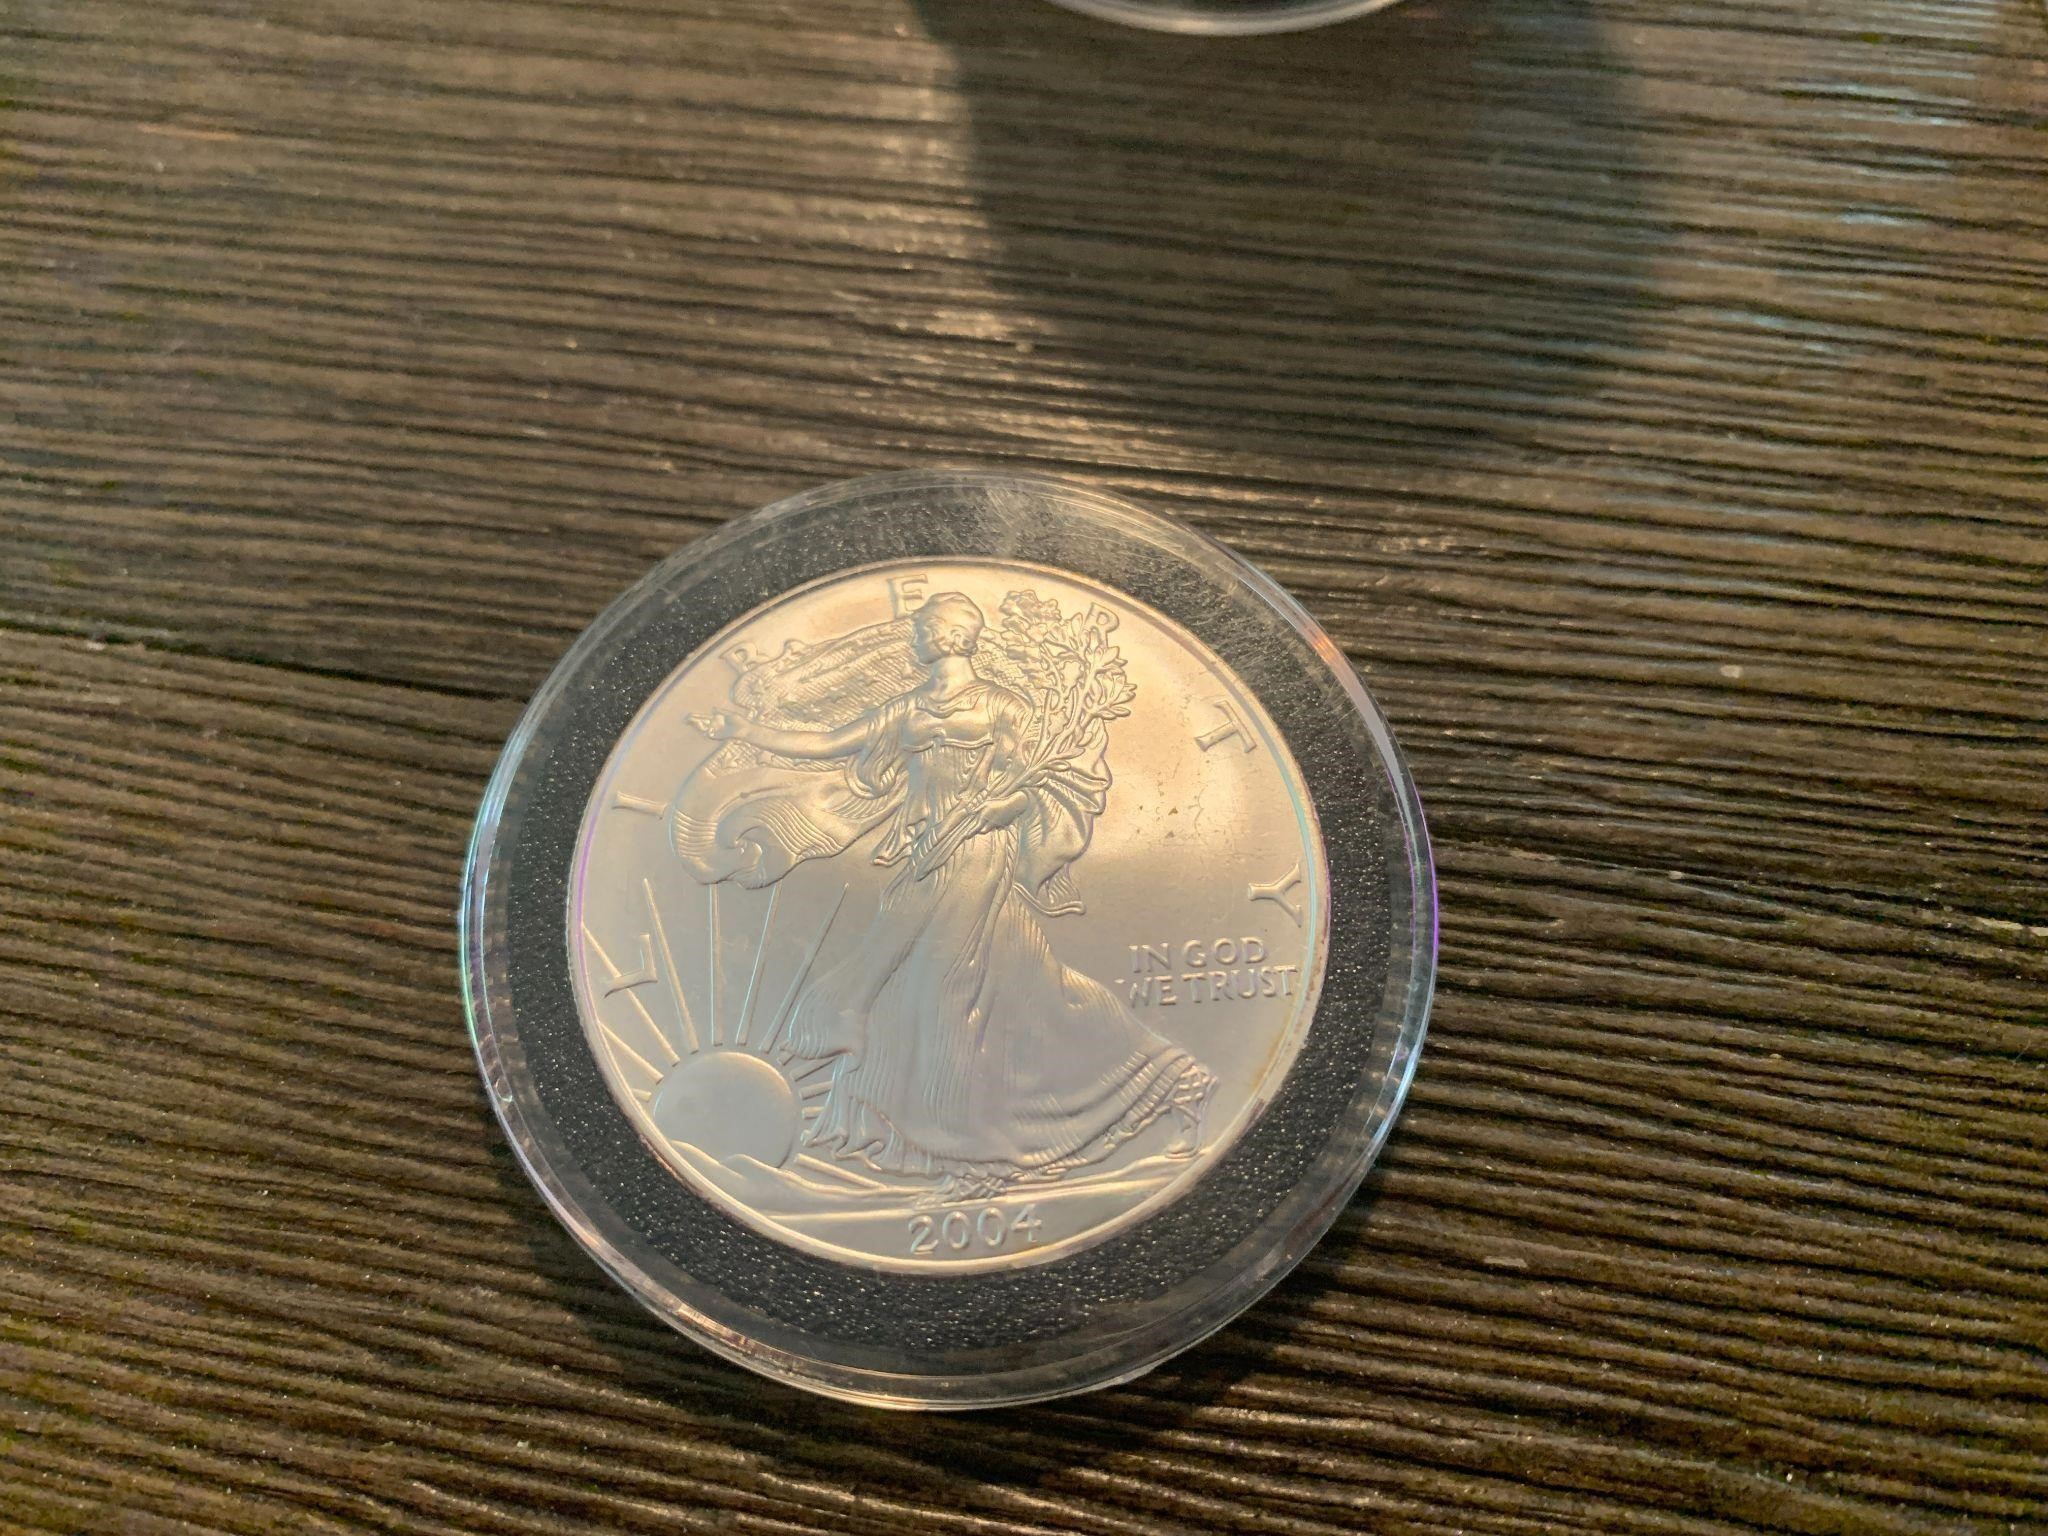 Collector Coin Auction